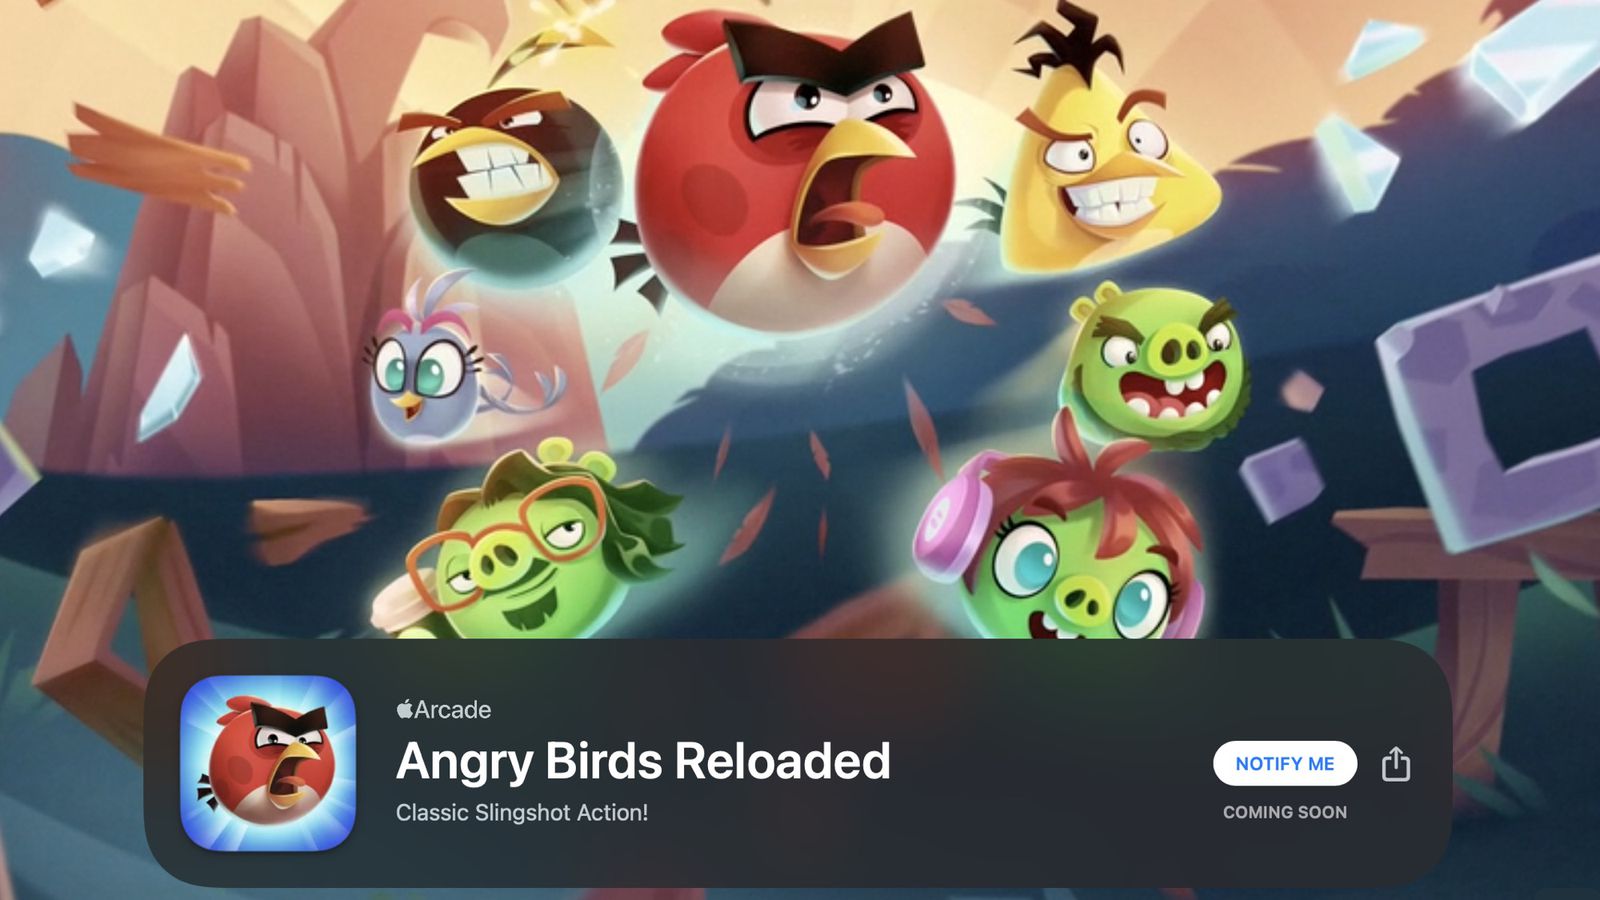 Best iPhone Game Updates: Diablo Immortal, Subway Surfers, Homescapes,  Angry Birds Reloaded and More - Game News 24